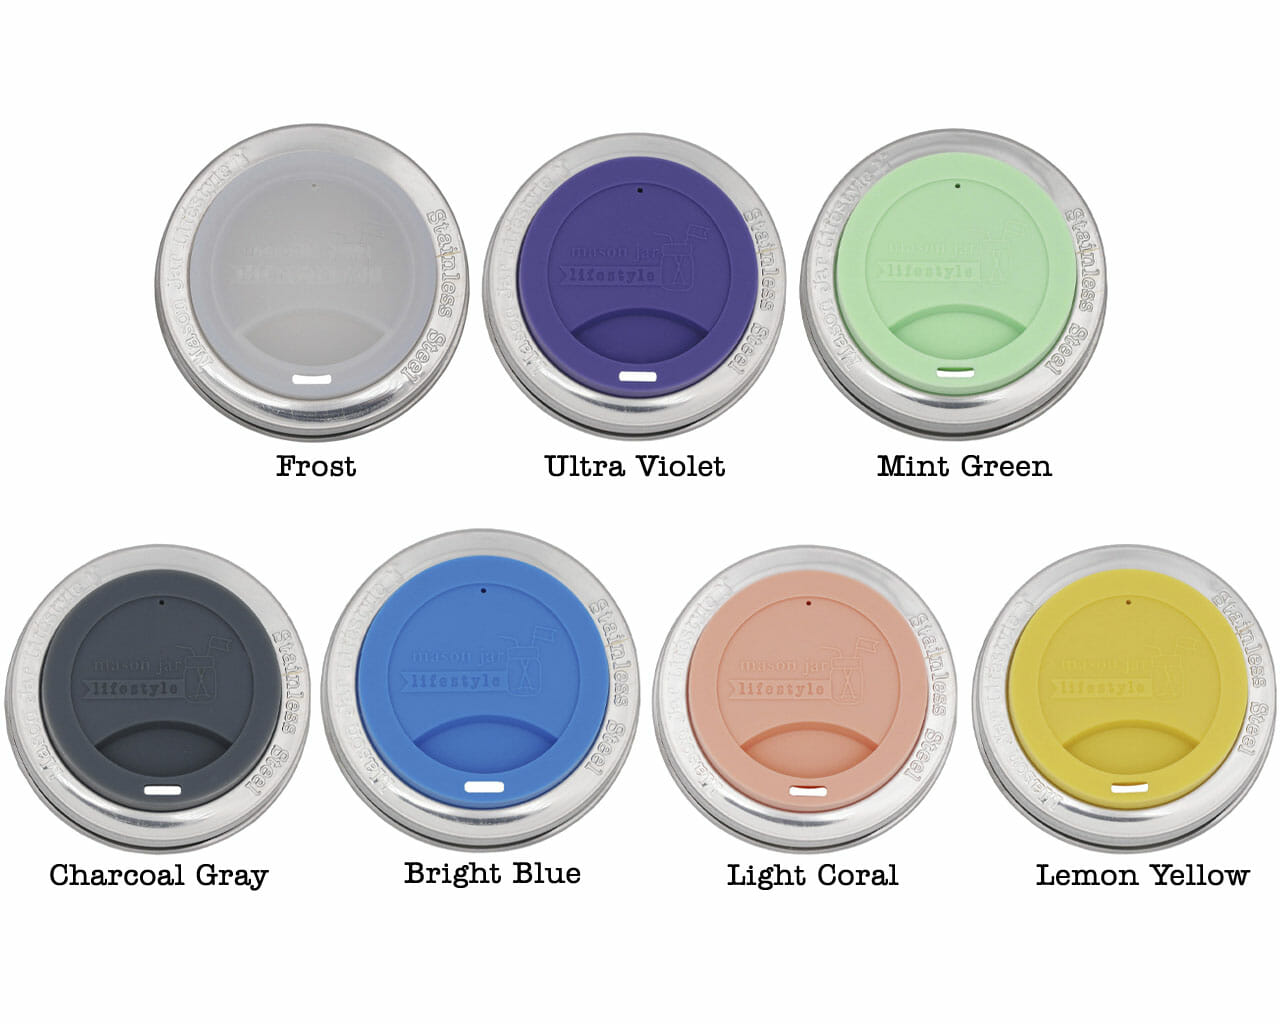 frost, ultra violet, mint green, charcoal gray, bright blue, light coral, lemon yellow regular mouth silicone drinking lids for mason jars